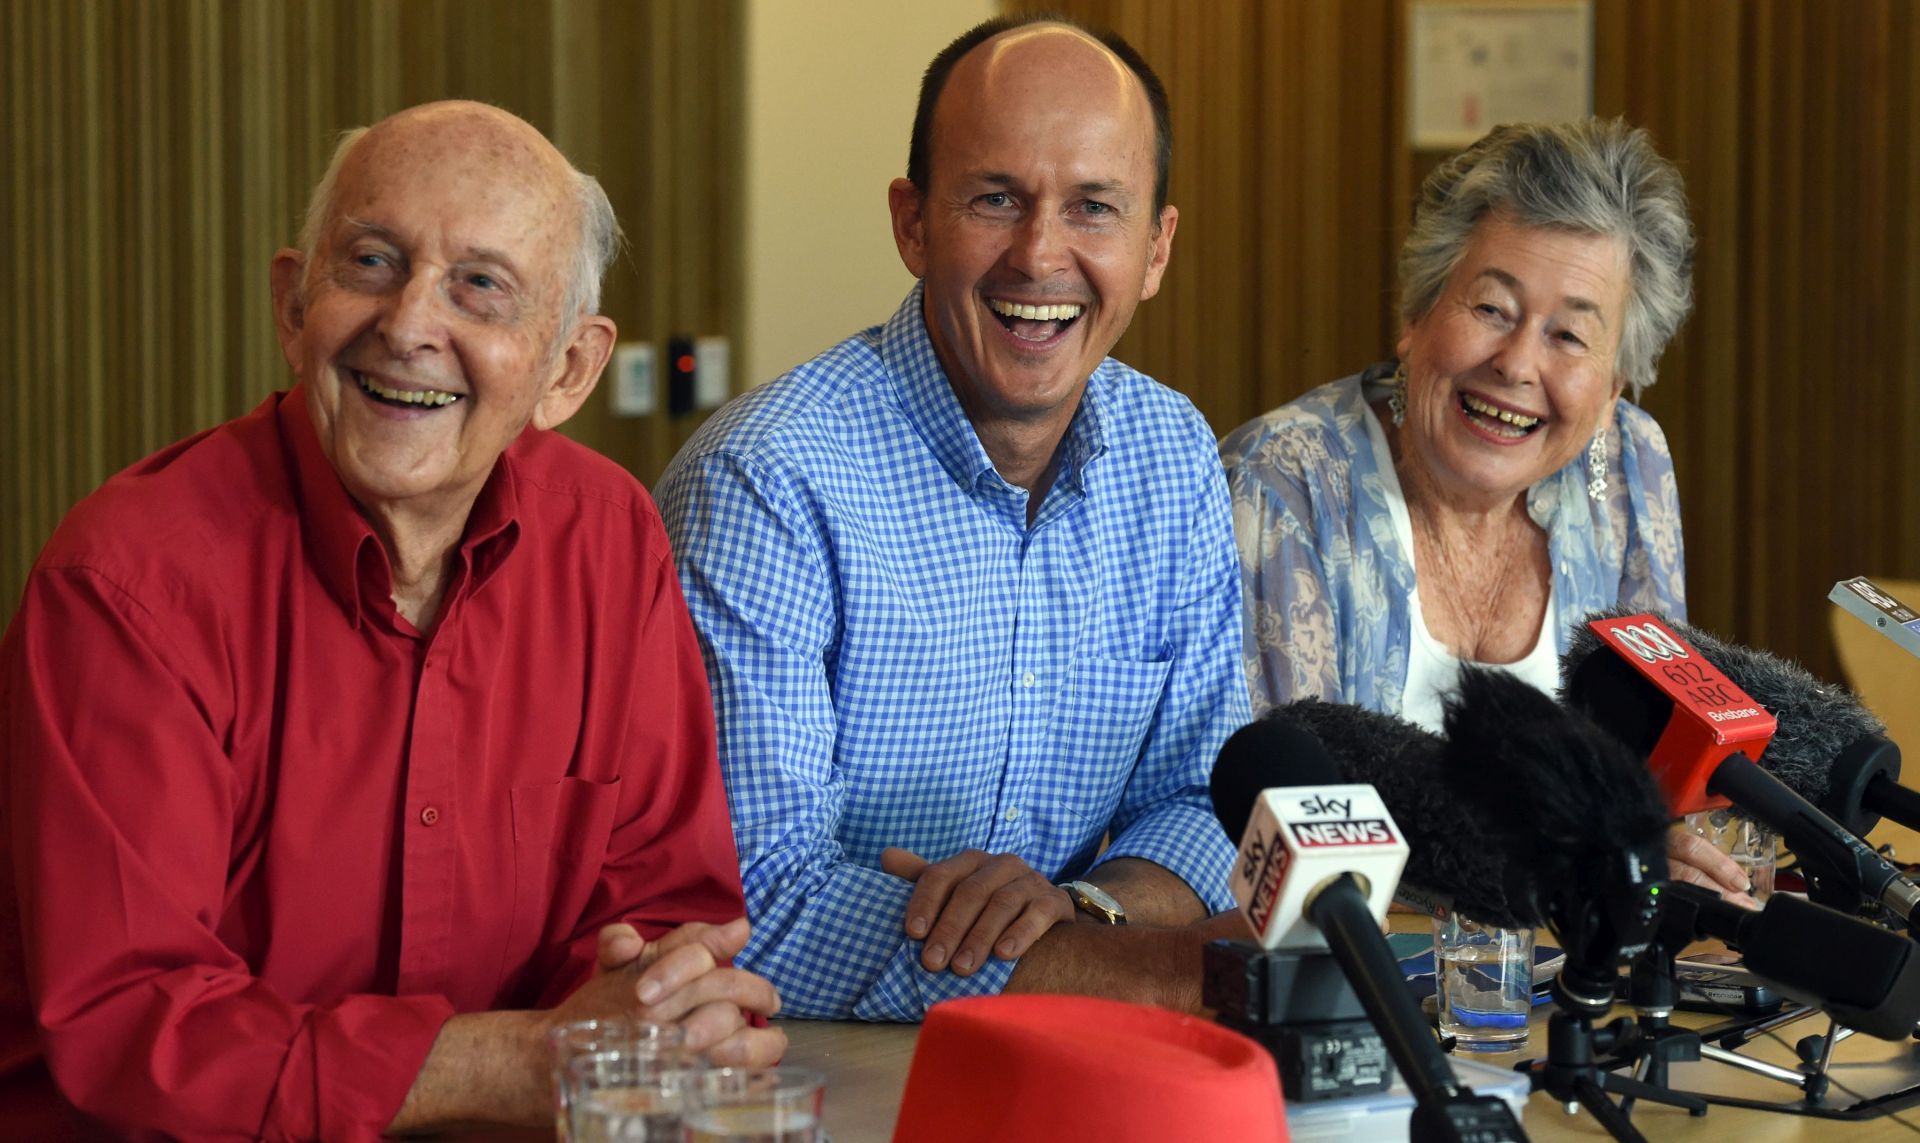 epa04600395 The family of Australian journalist Peter Greste (L-R) father Juris, brother Andrew and mother Lois, smile during a press conference in Brisbane, Australia, 02 February 2015. Al Jazeera journalist Peter Greste was released from a Cairo jail on 01 February 2015, and deported after 400 days in jail on charges of faked reporting and collaborating with the banned Muslim Brotherhood. The veteran television reporter was driven to Cairo Airport in the afternoon and put on a flight for Cyprus. In Australia, government officials confirmed he was on his way home and welcomed his unconditional release from what it said was detention for political reasons.  EPA/DAN PELED AUSTRALIA AND NEW ZEALAND OUT